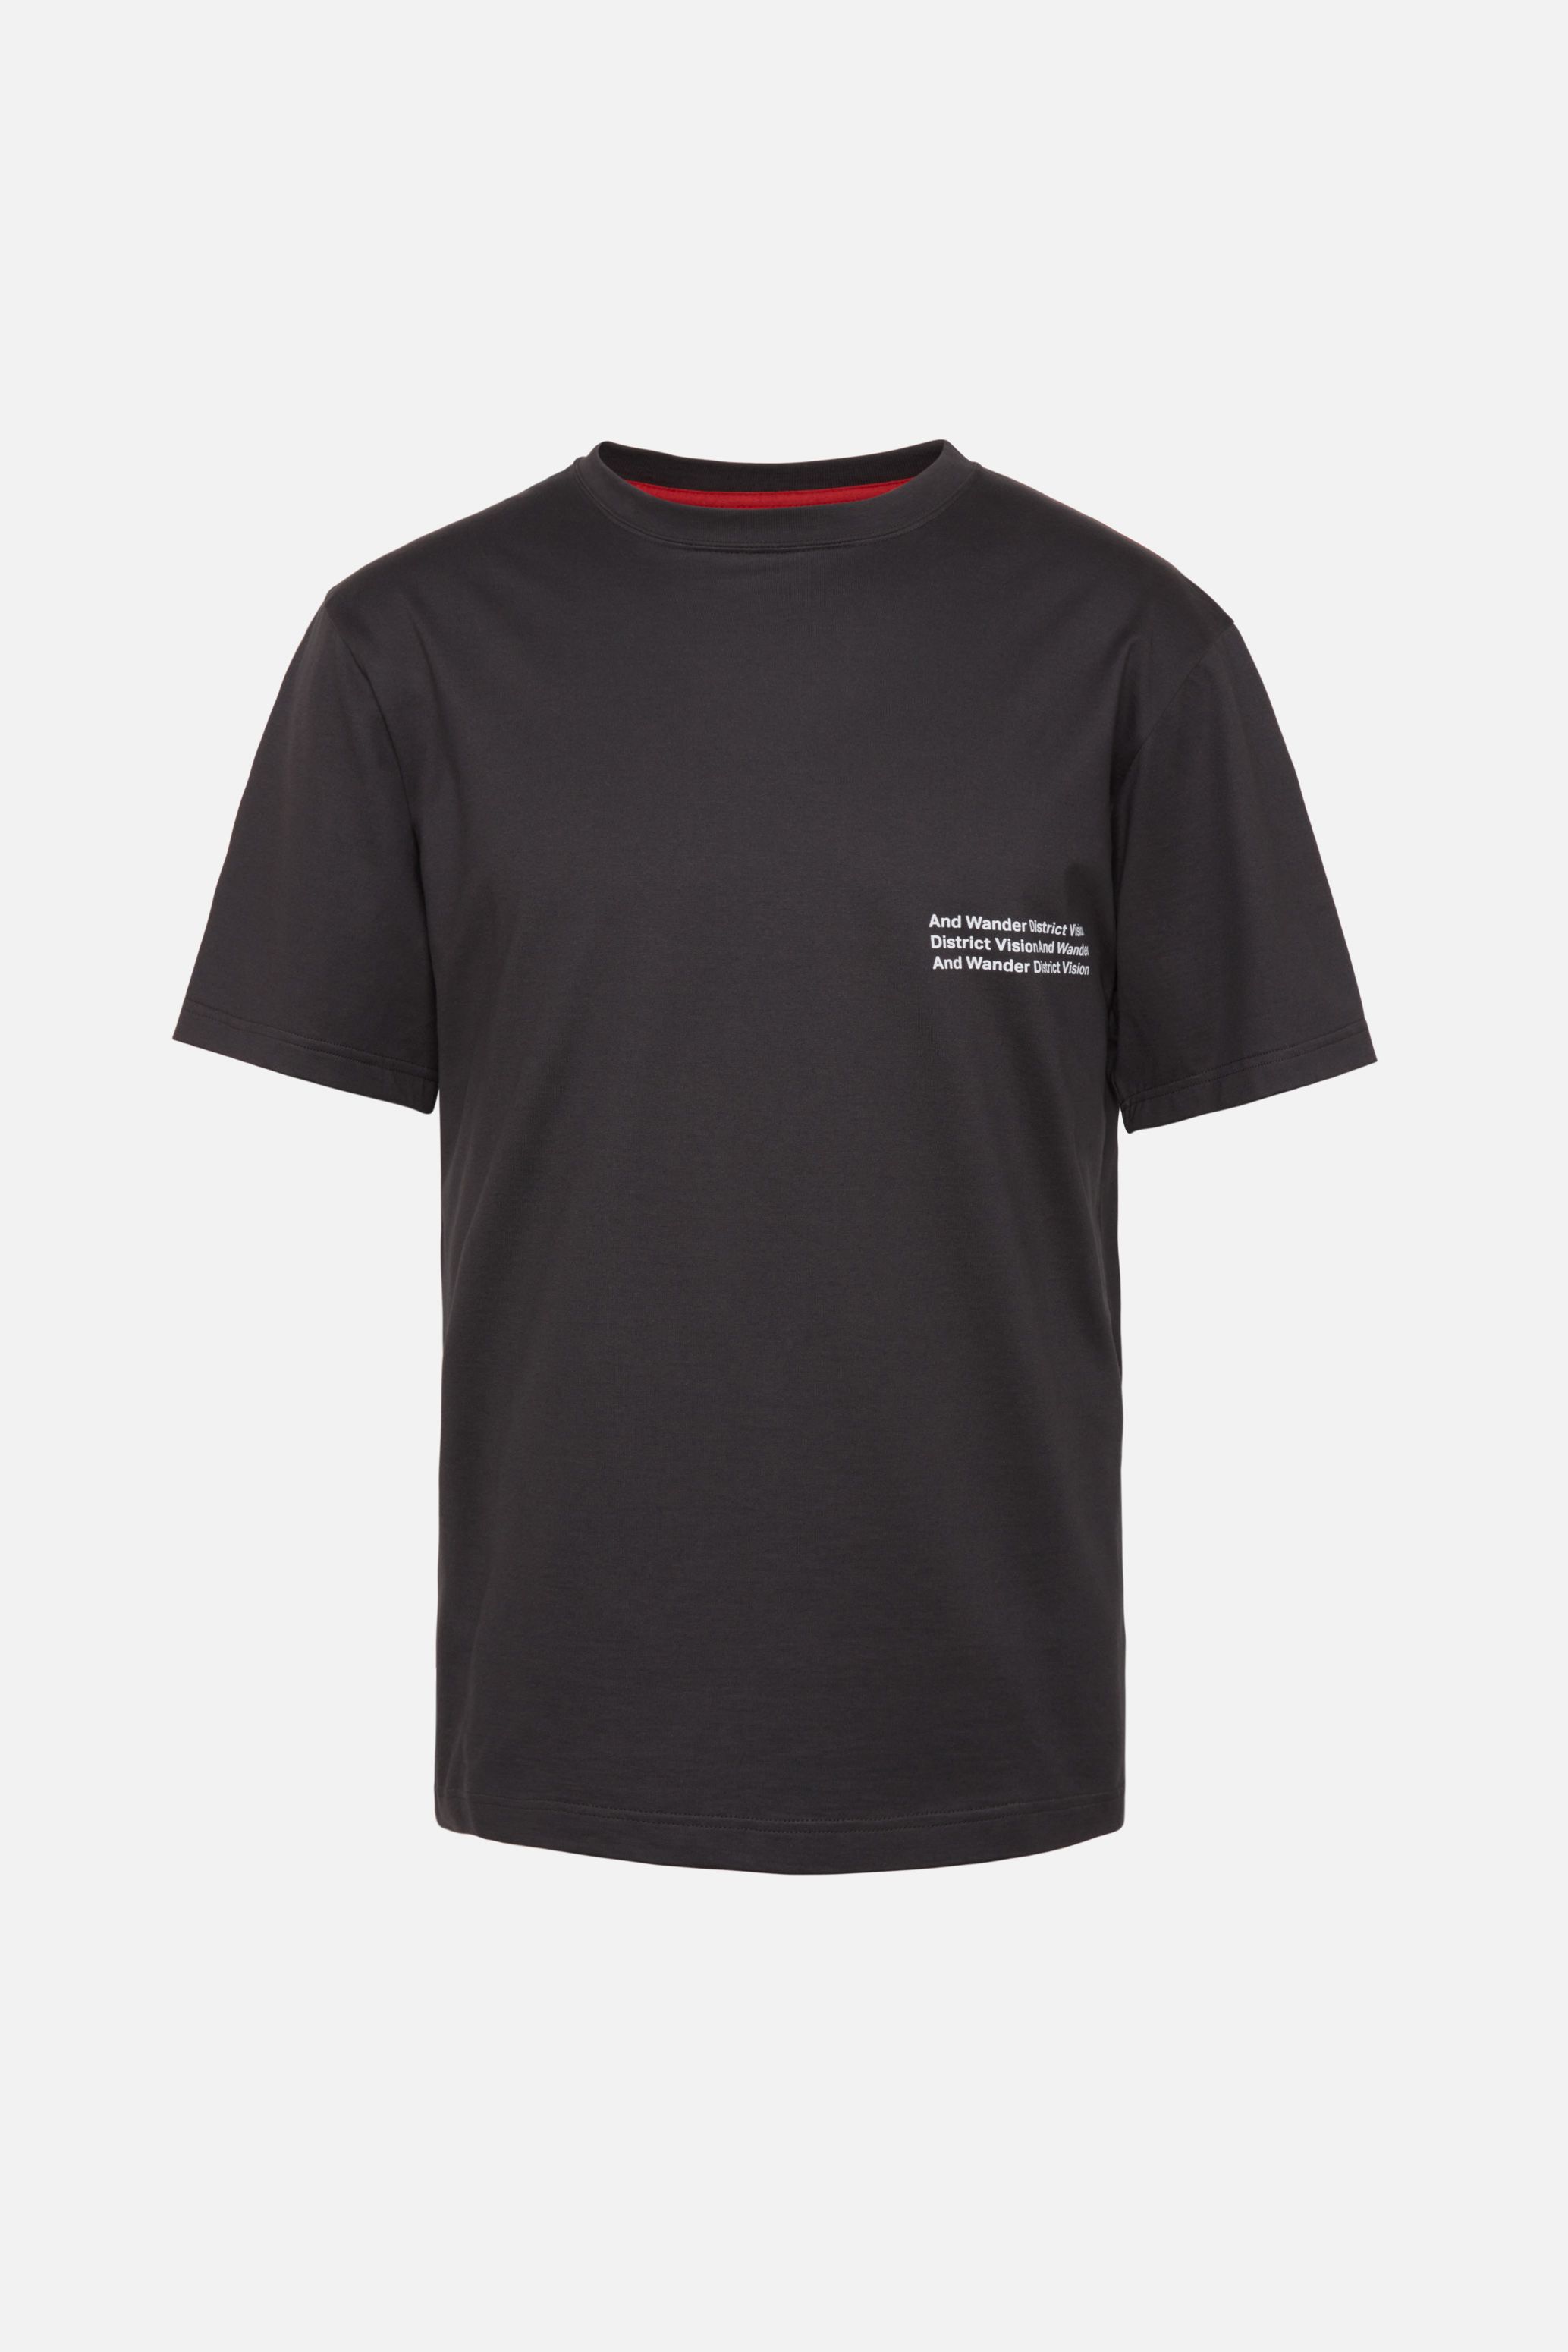 District Vision x and wander Short Sleeve T-Shirt